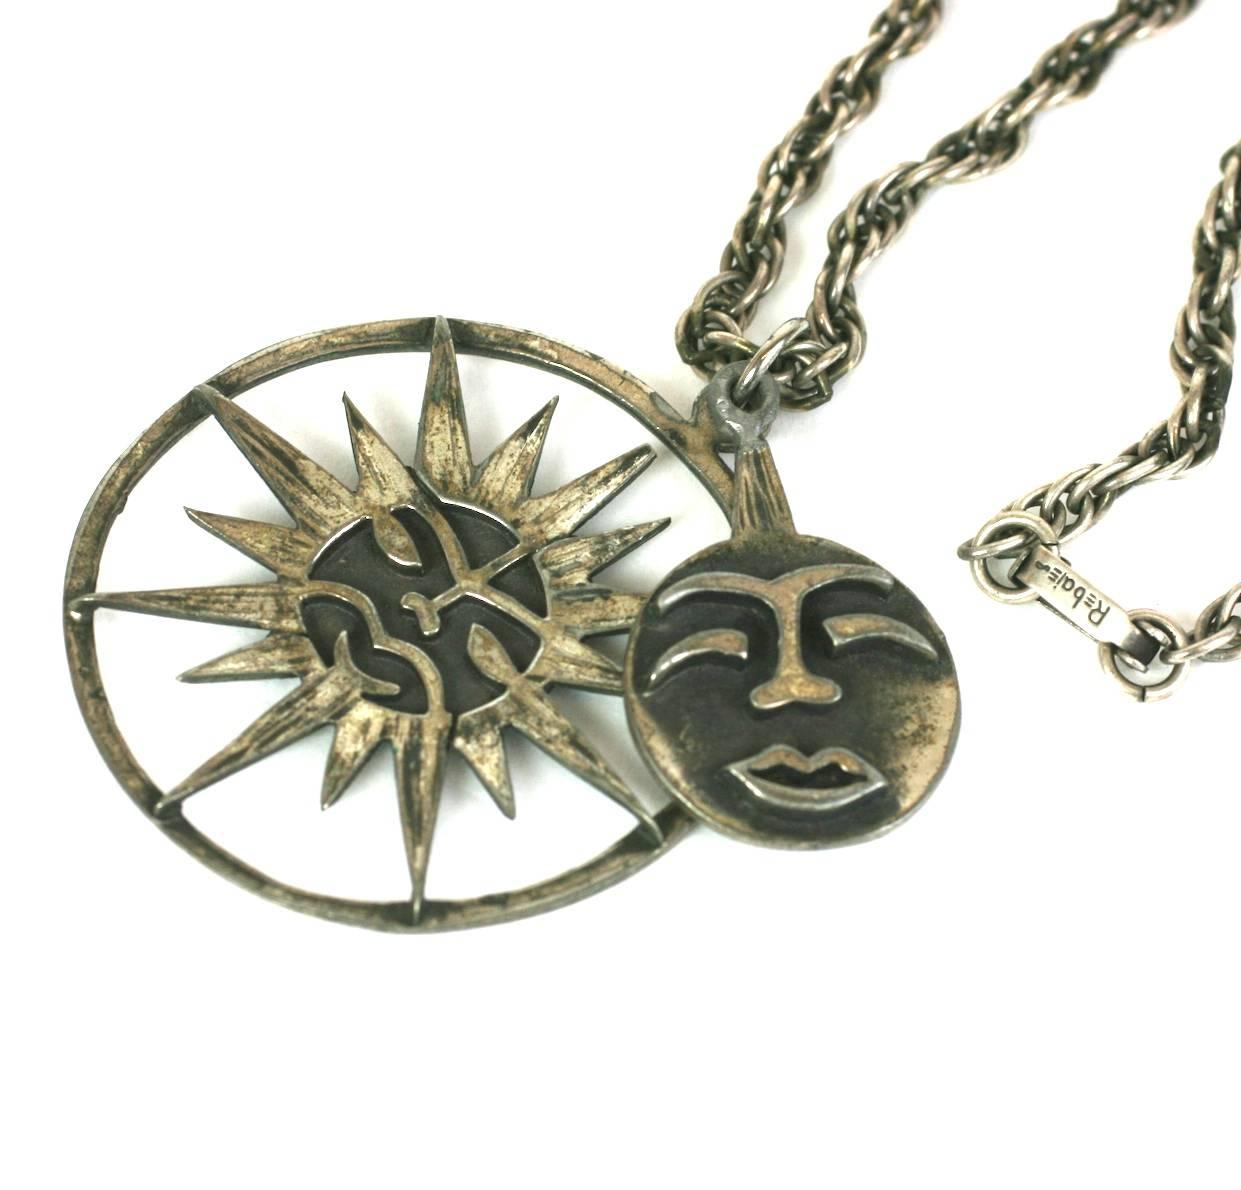 Charming and unusual Rebajes Sun-Moon Pendant in patinaed silver metal. A 